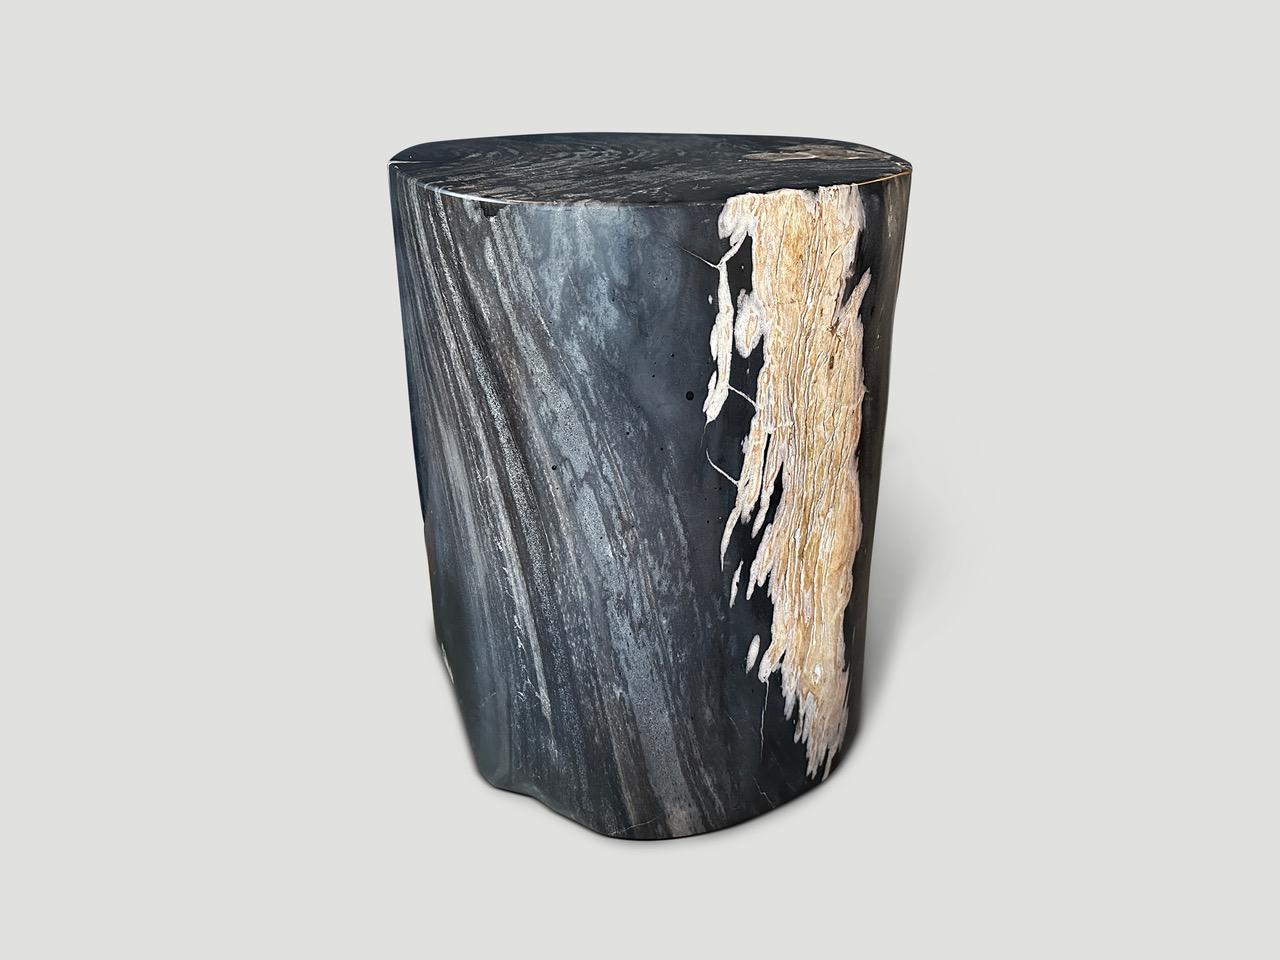 Indonesian Andrianna Shamaris Exquisite High Quality Petrified Wood Side Table  For Sale